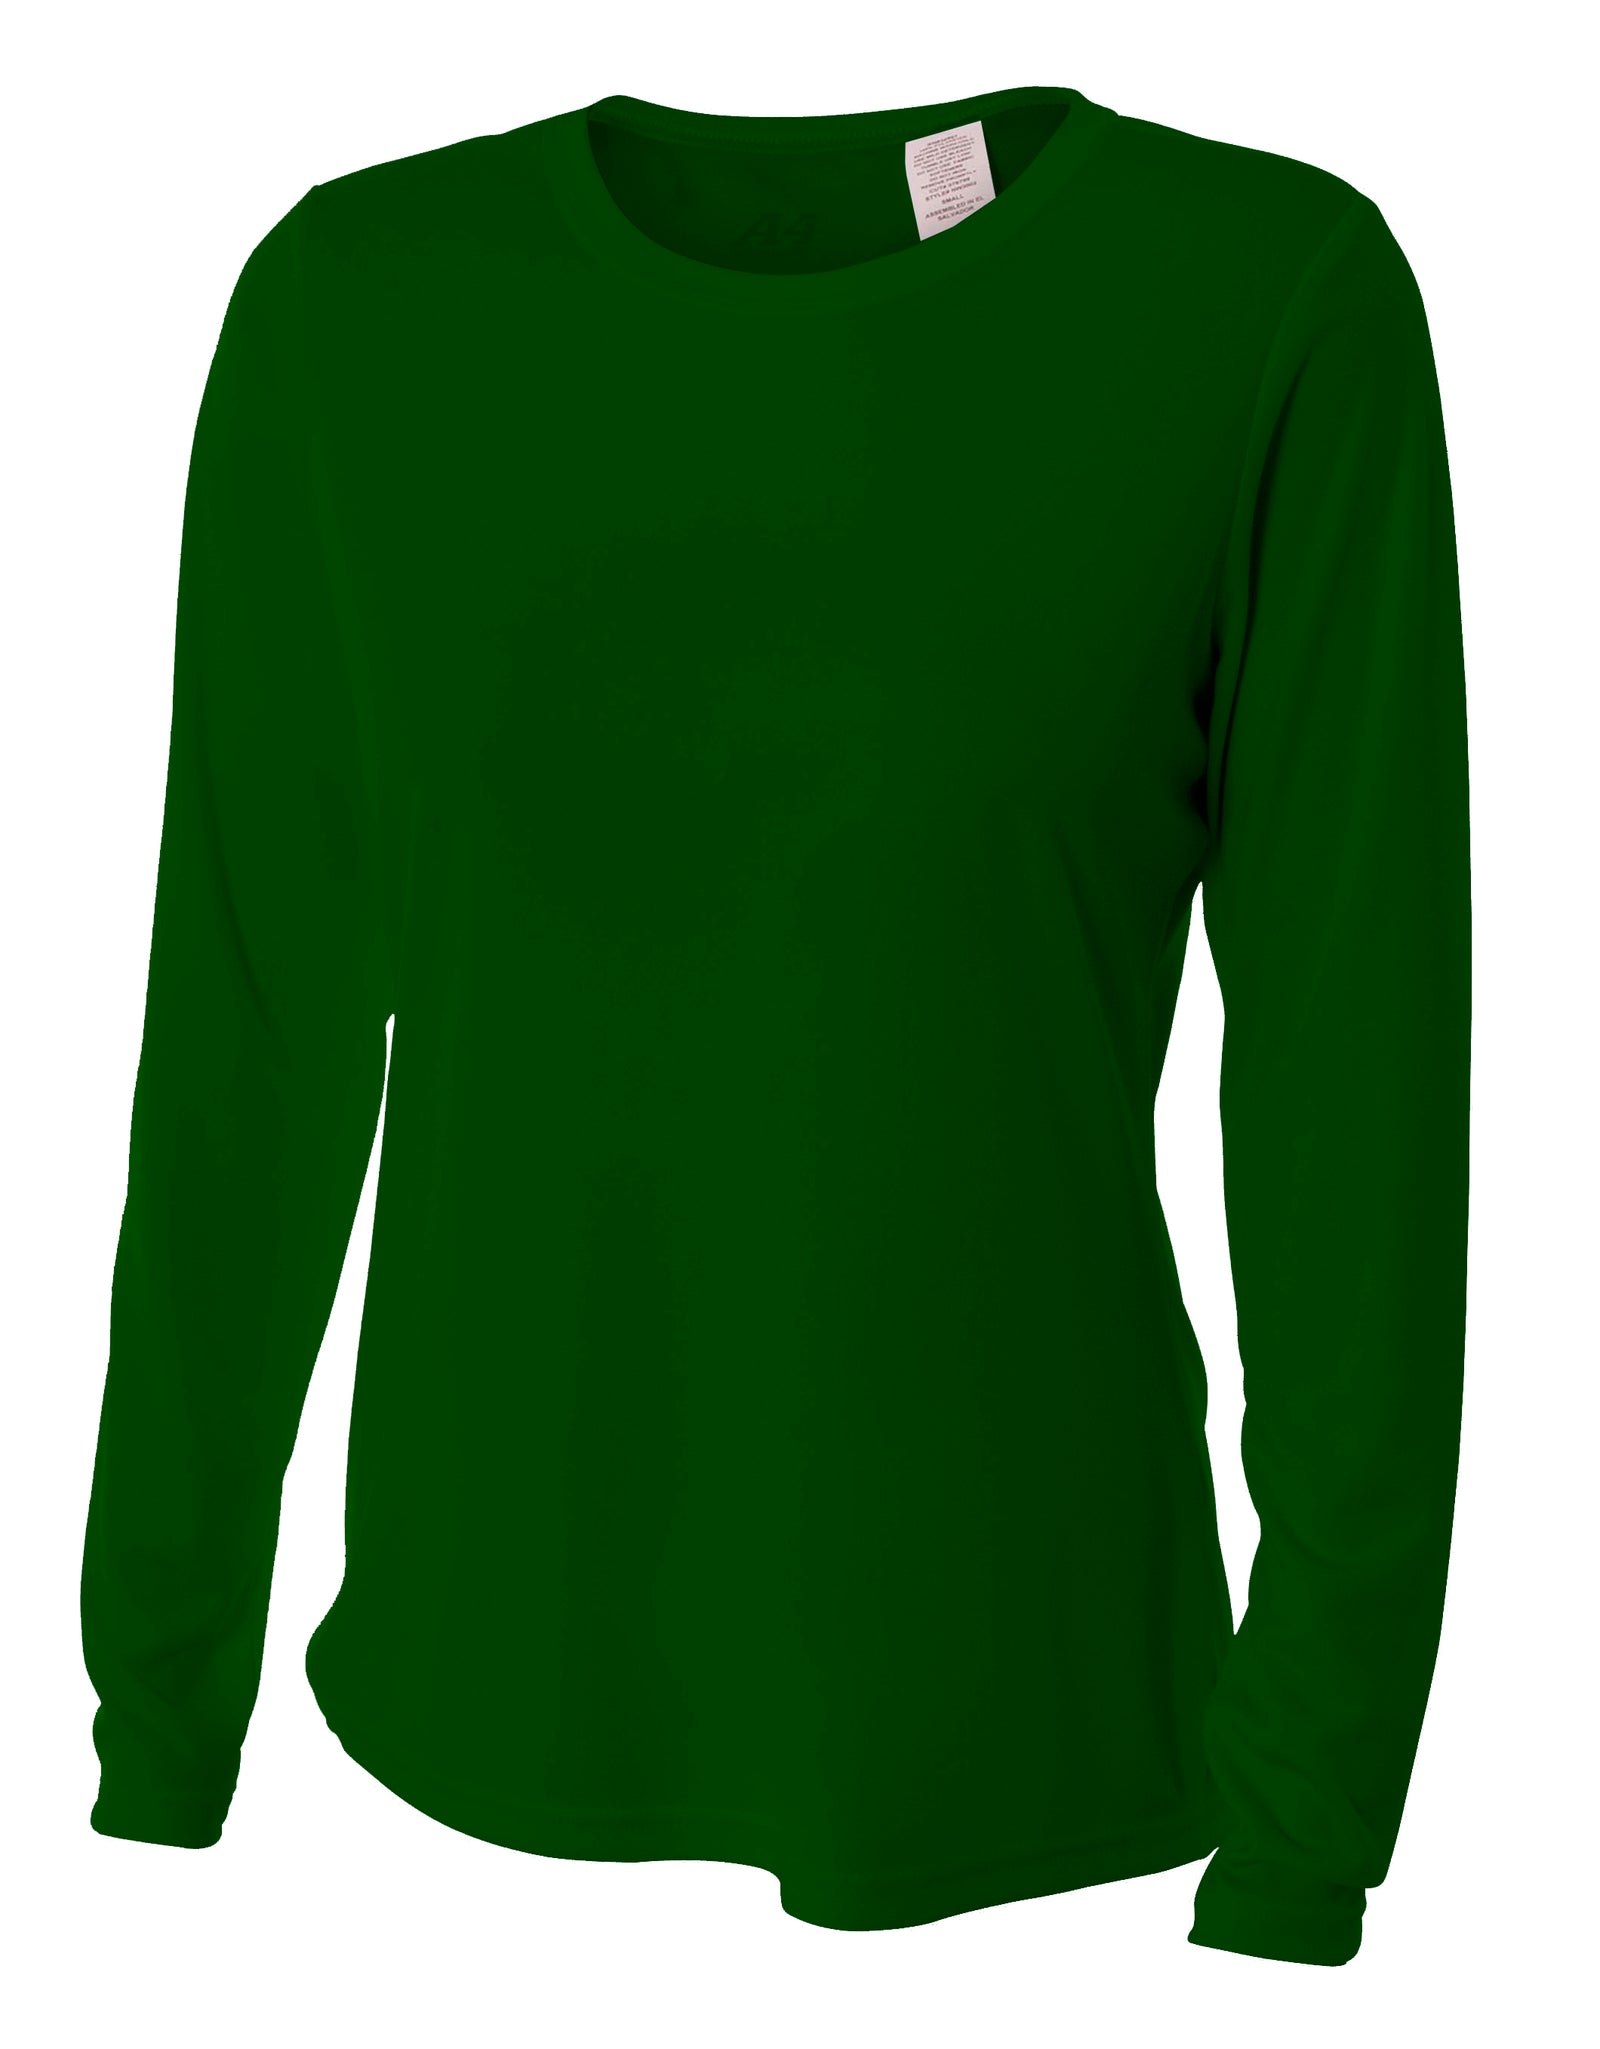 Forest A4 Long Sleeve Cooling Performance Crew